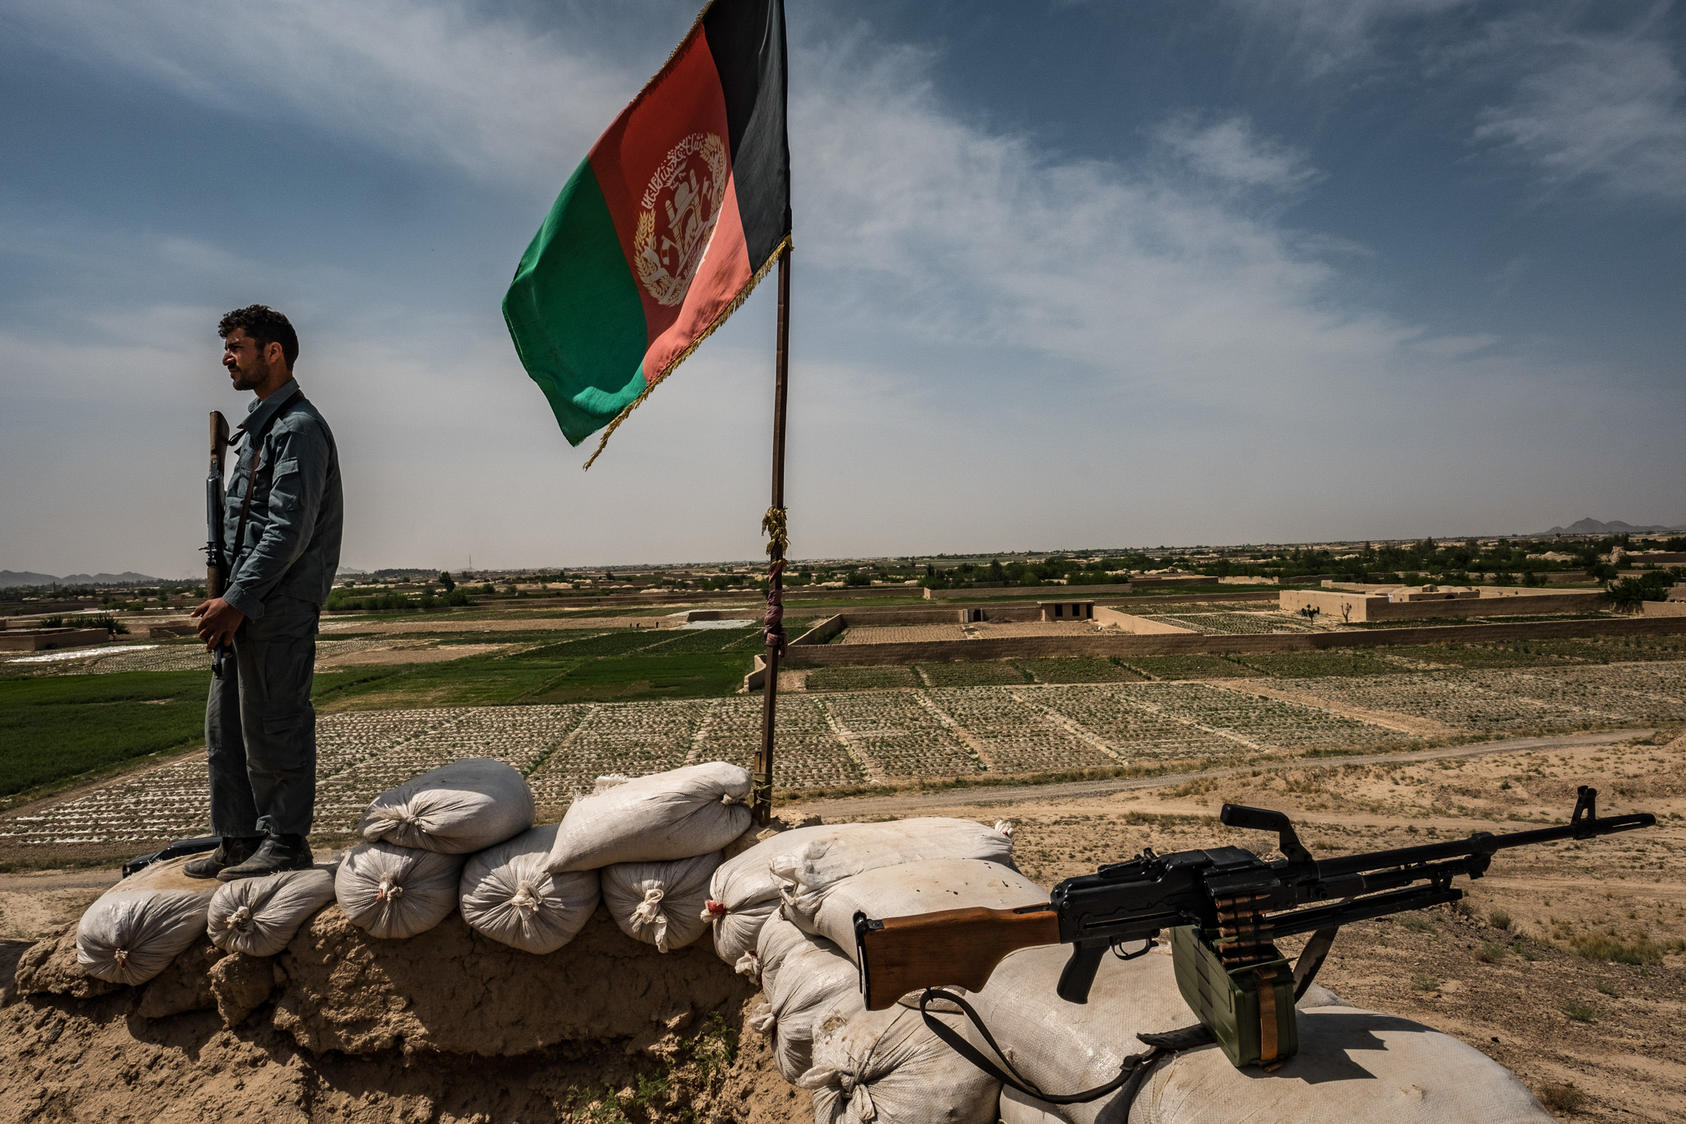 An Afghan policeman stands watch at his unit’s small hilltop outpost overlooking the districts north of the provincial capital of Farah in Afghanistan, April 2017. Photo Courtesy of The New York Times/Bryan Denton